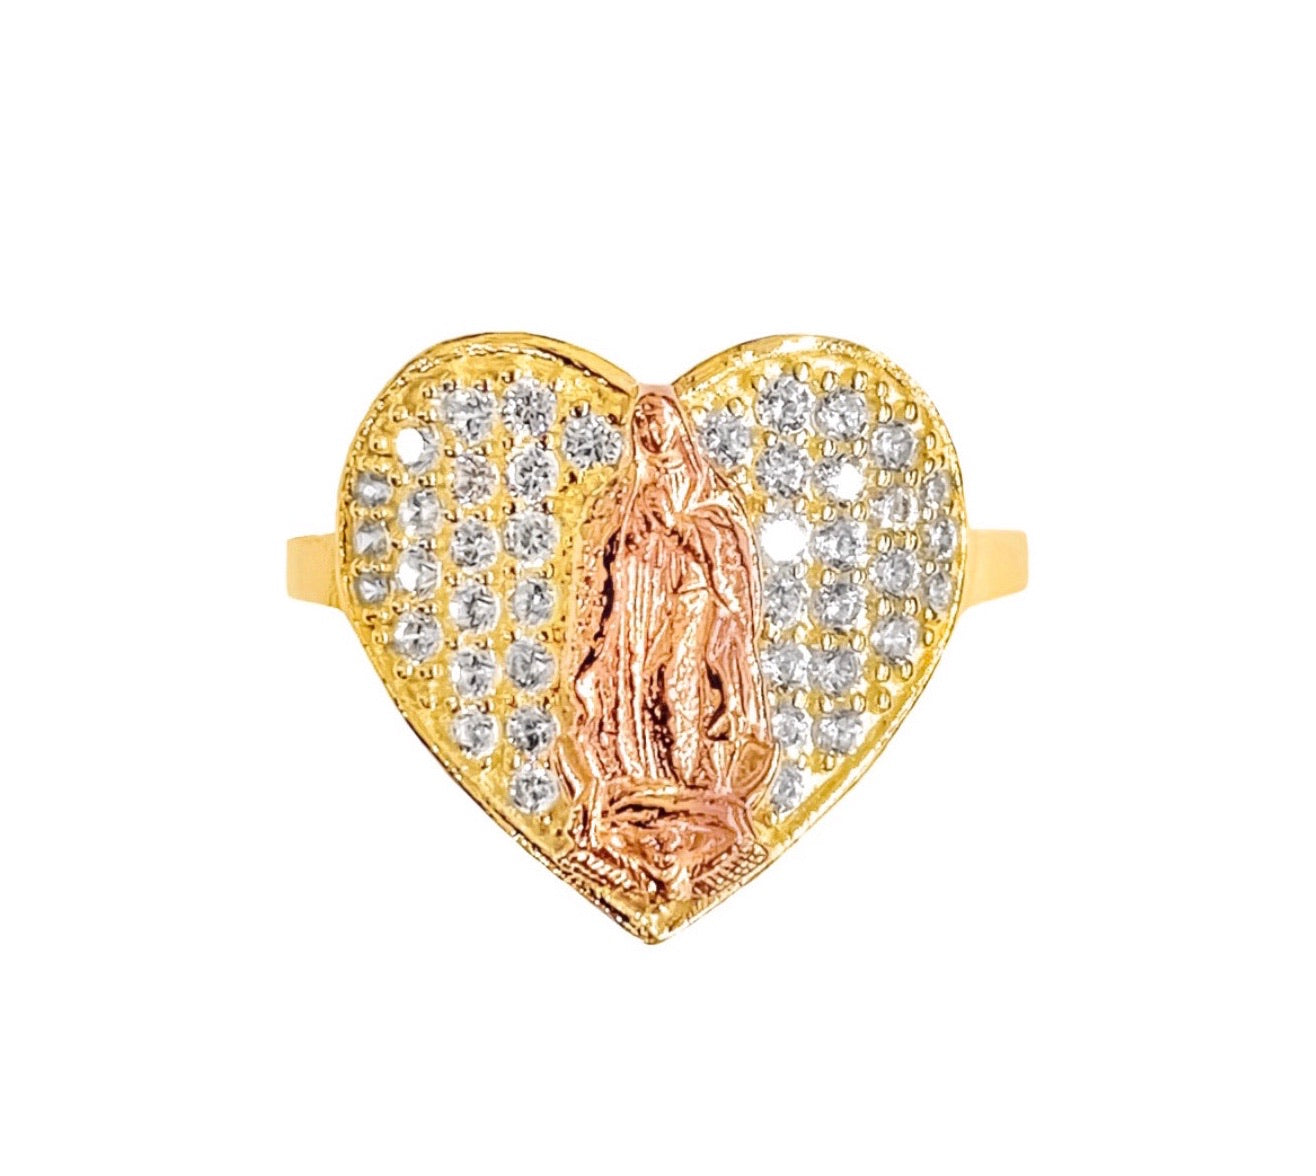 14K YELLOW GOLD PAVE VIRGIN MARY HEART RING